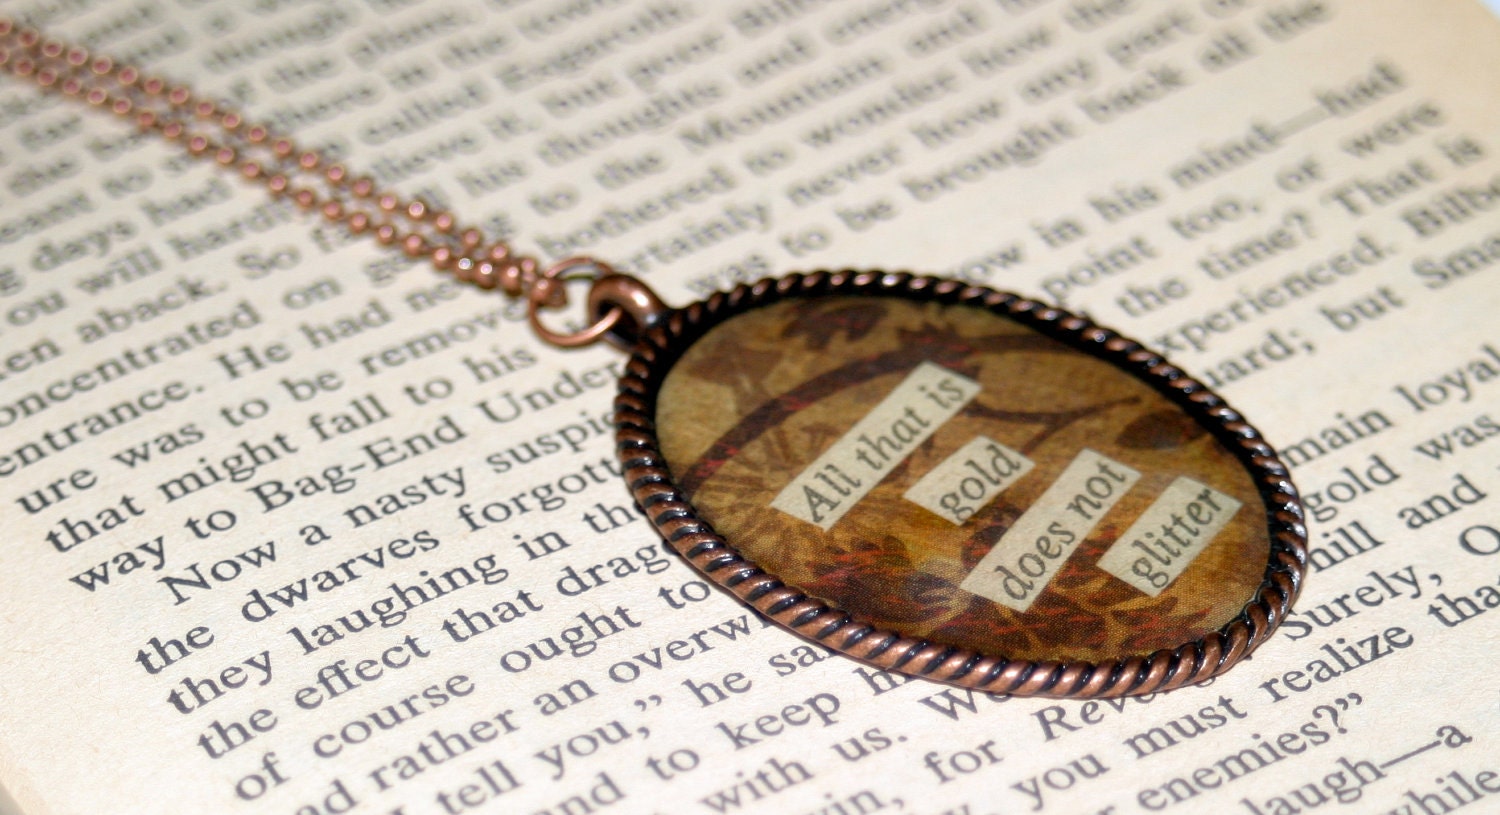 Literary Necklace - All that is gold does not glitter - Lord of the Rings